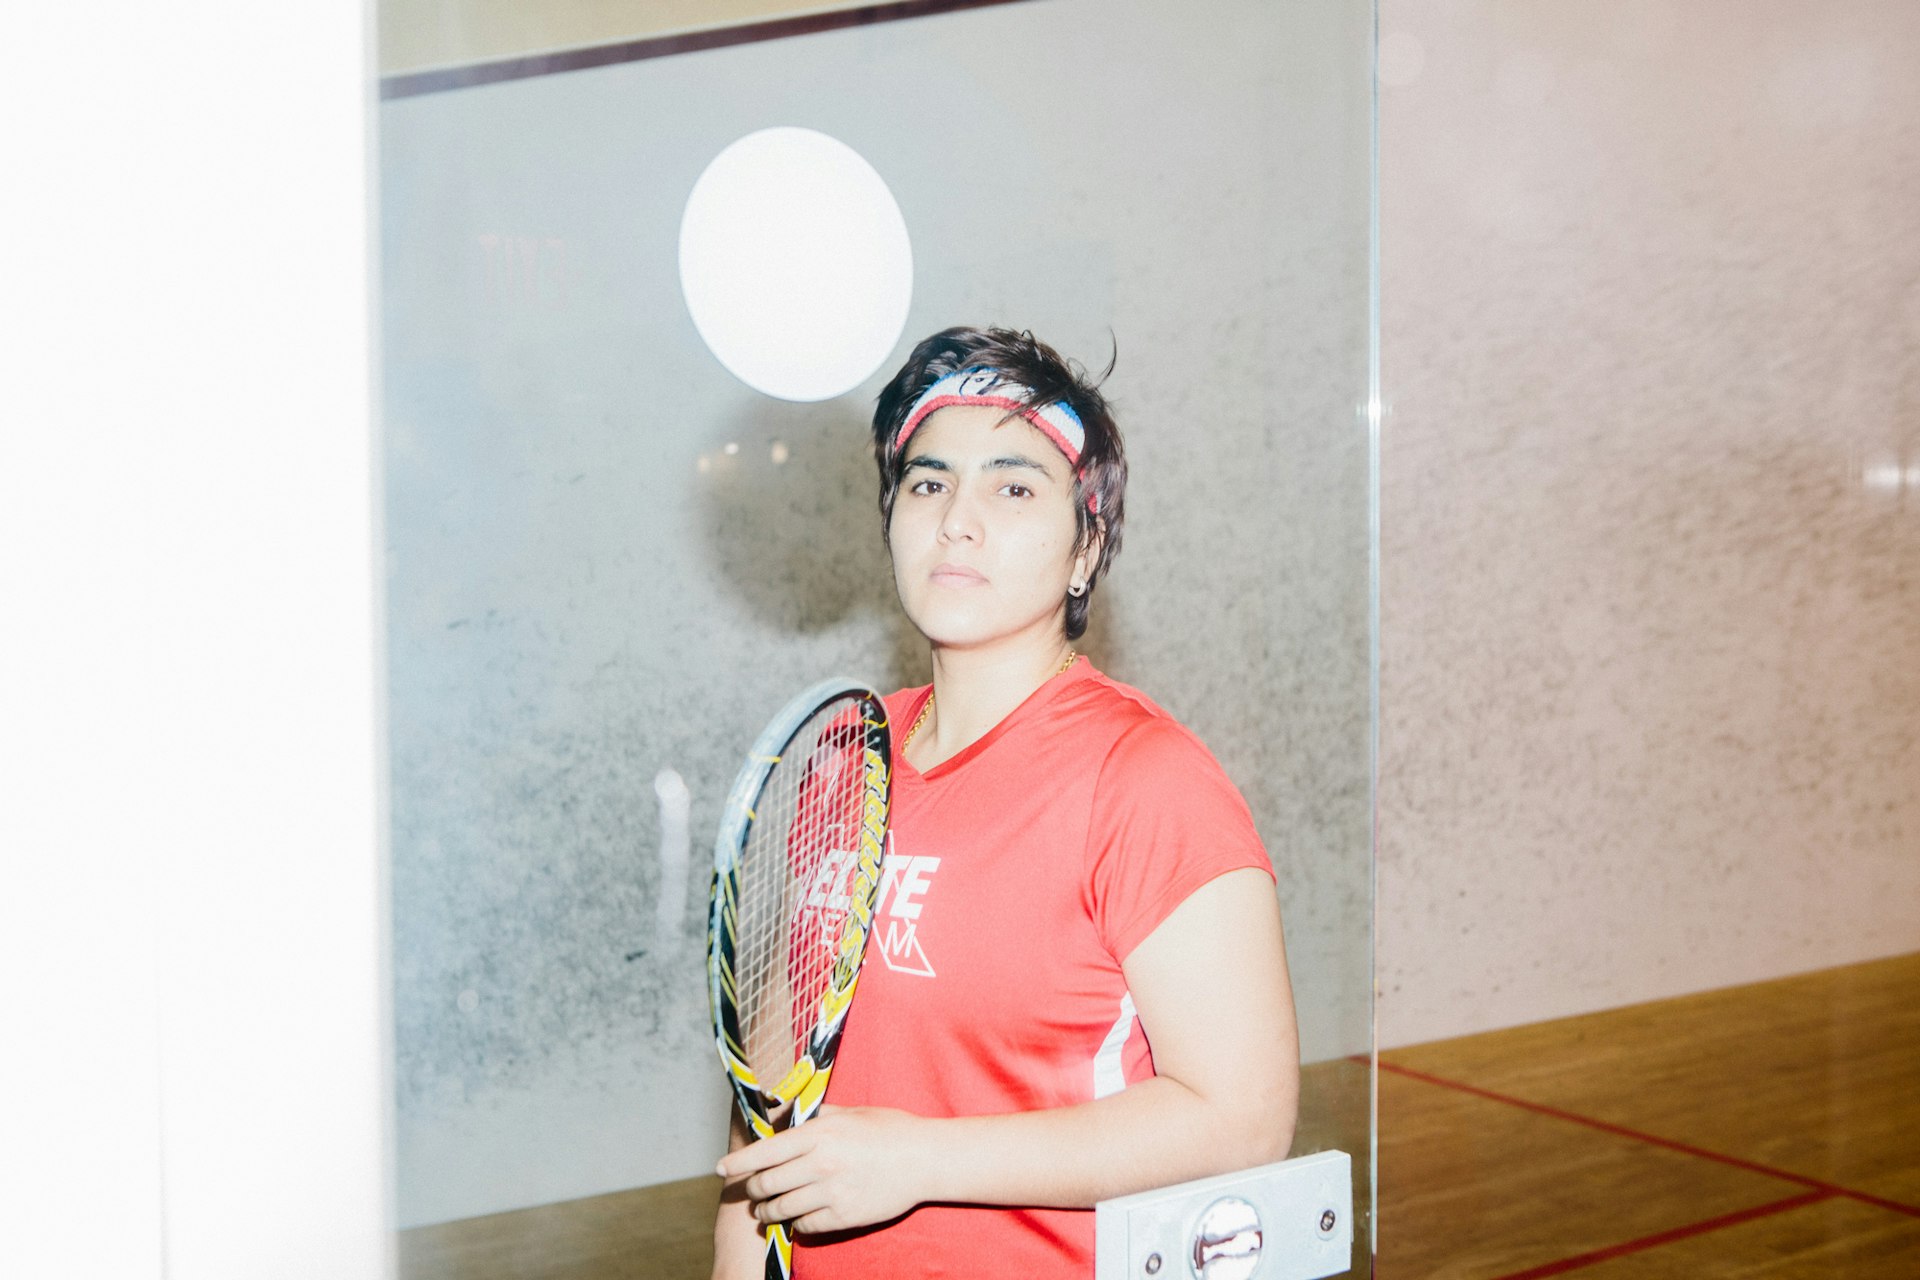 The sports hero who disguised herself from the Taliban